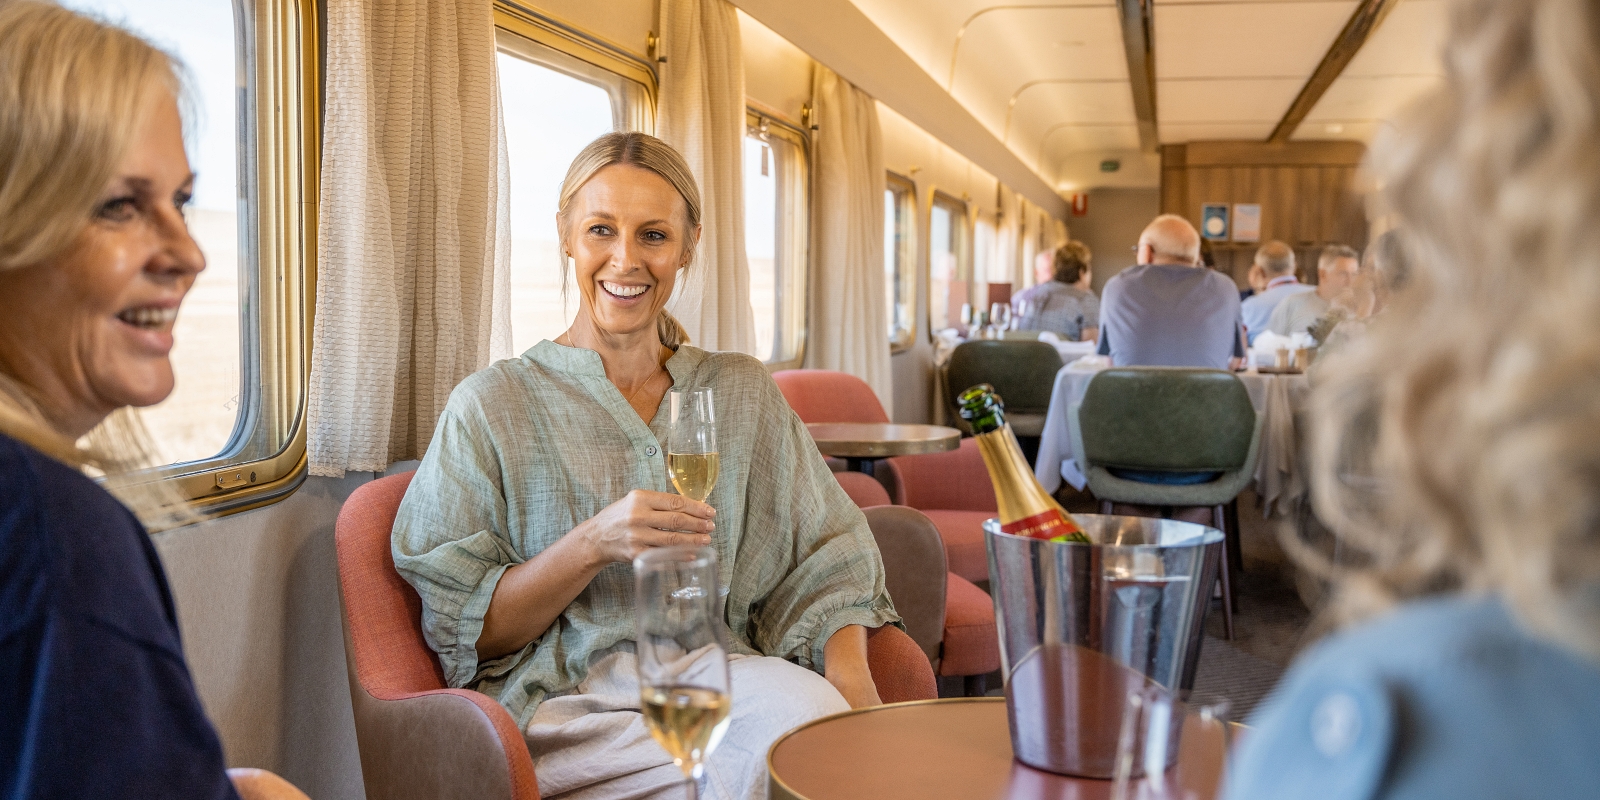 train, The Ghan, food, Outback, fire, wine